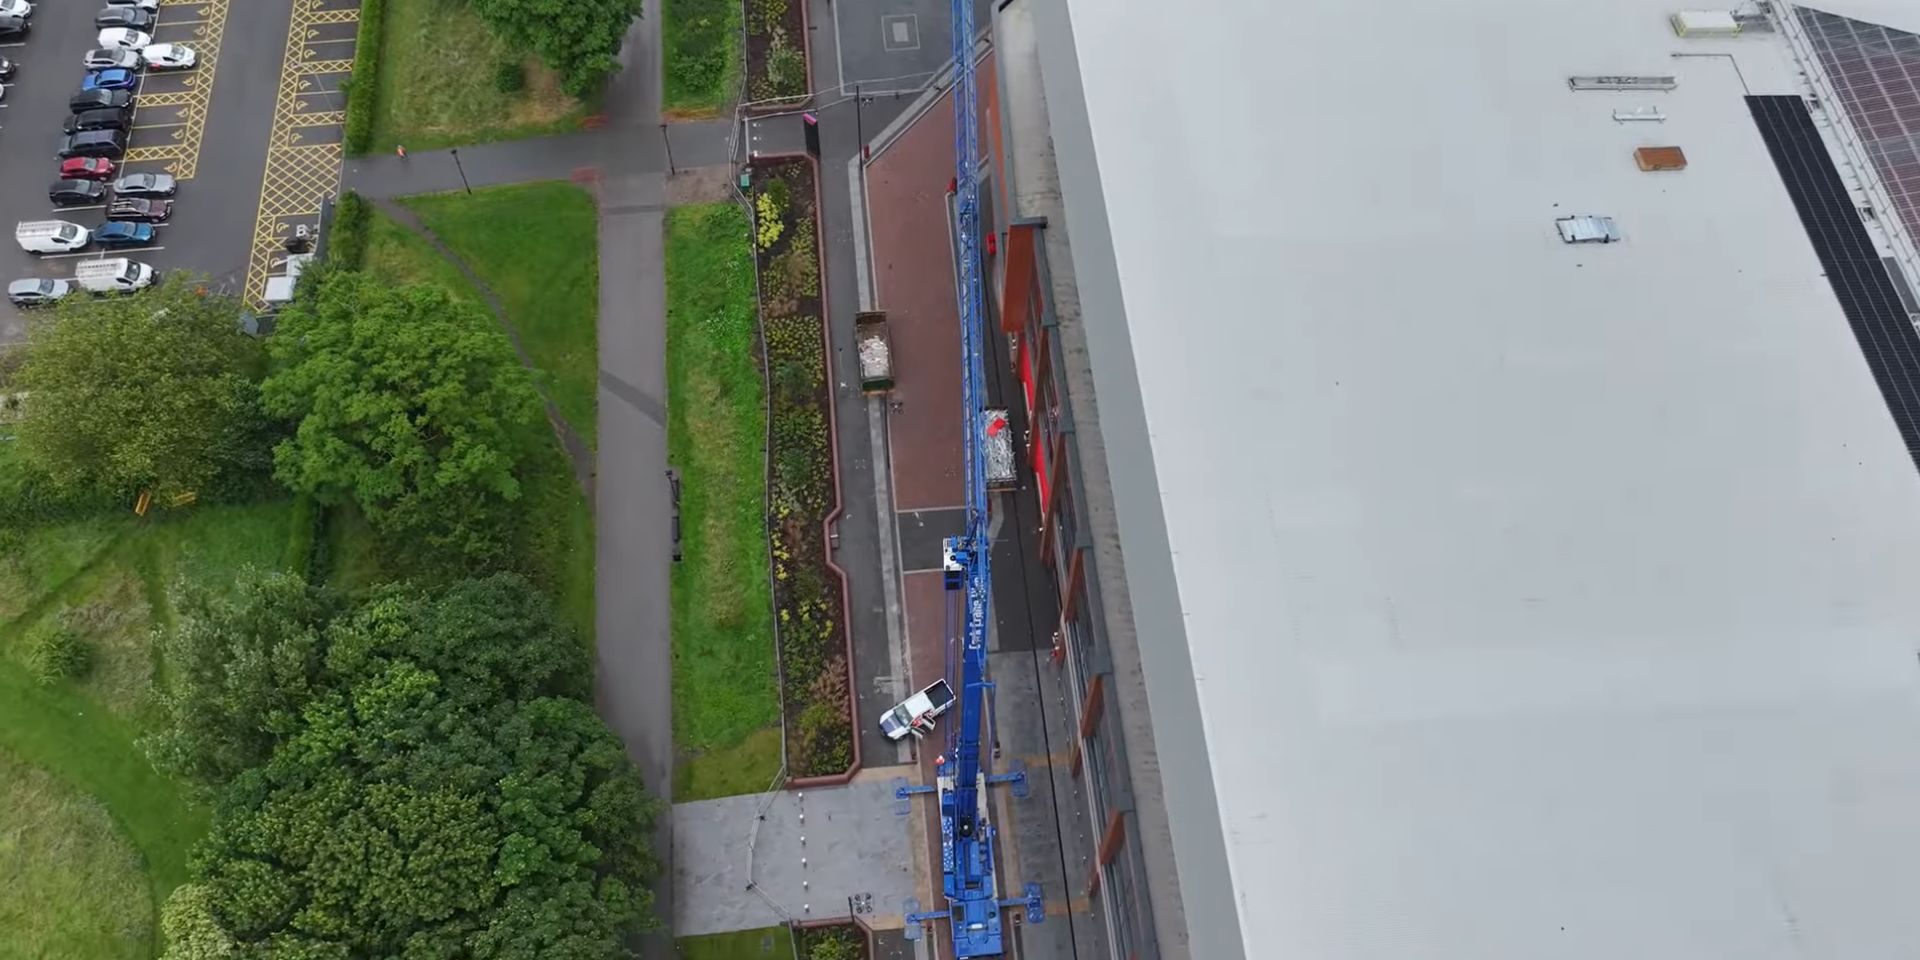 (Video) New cranes spotted outside Anfield as summer refurbishments begin